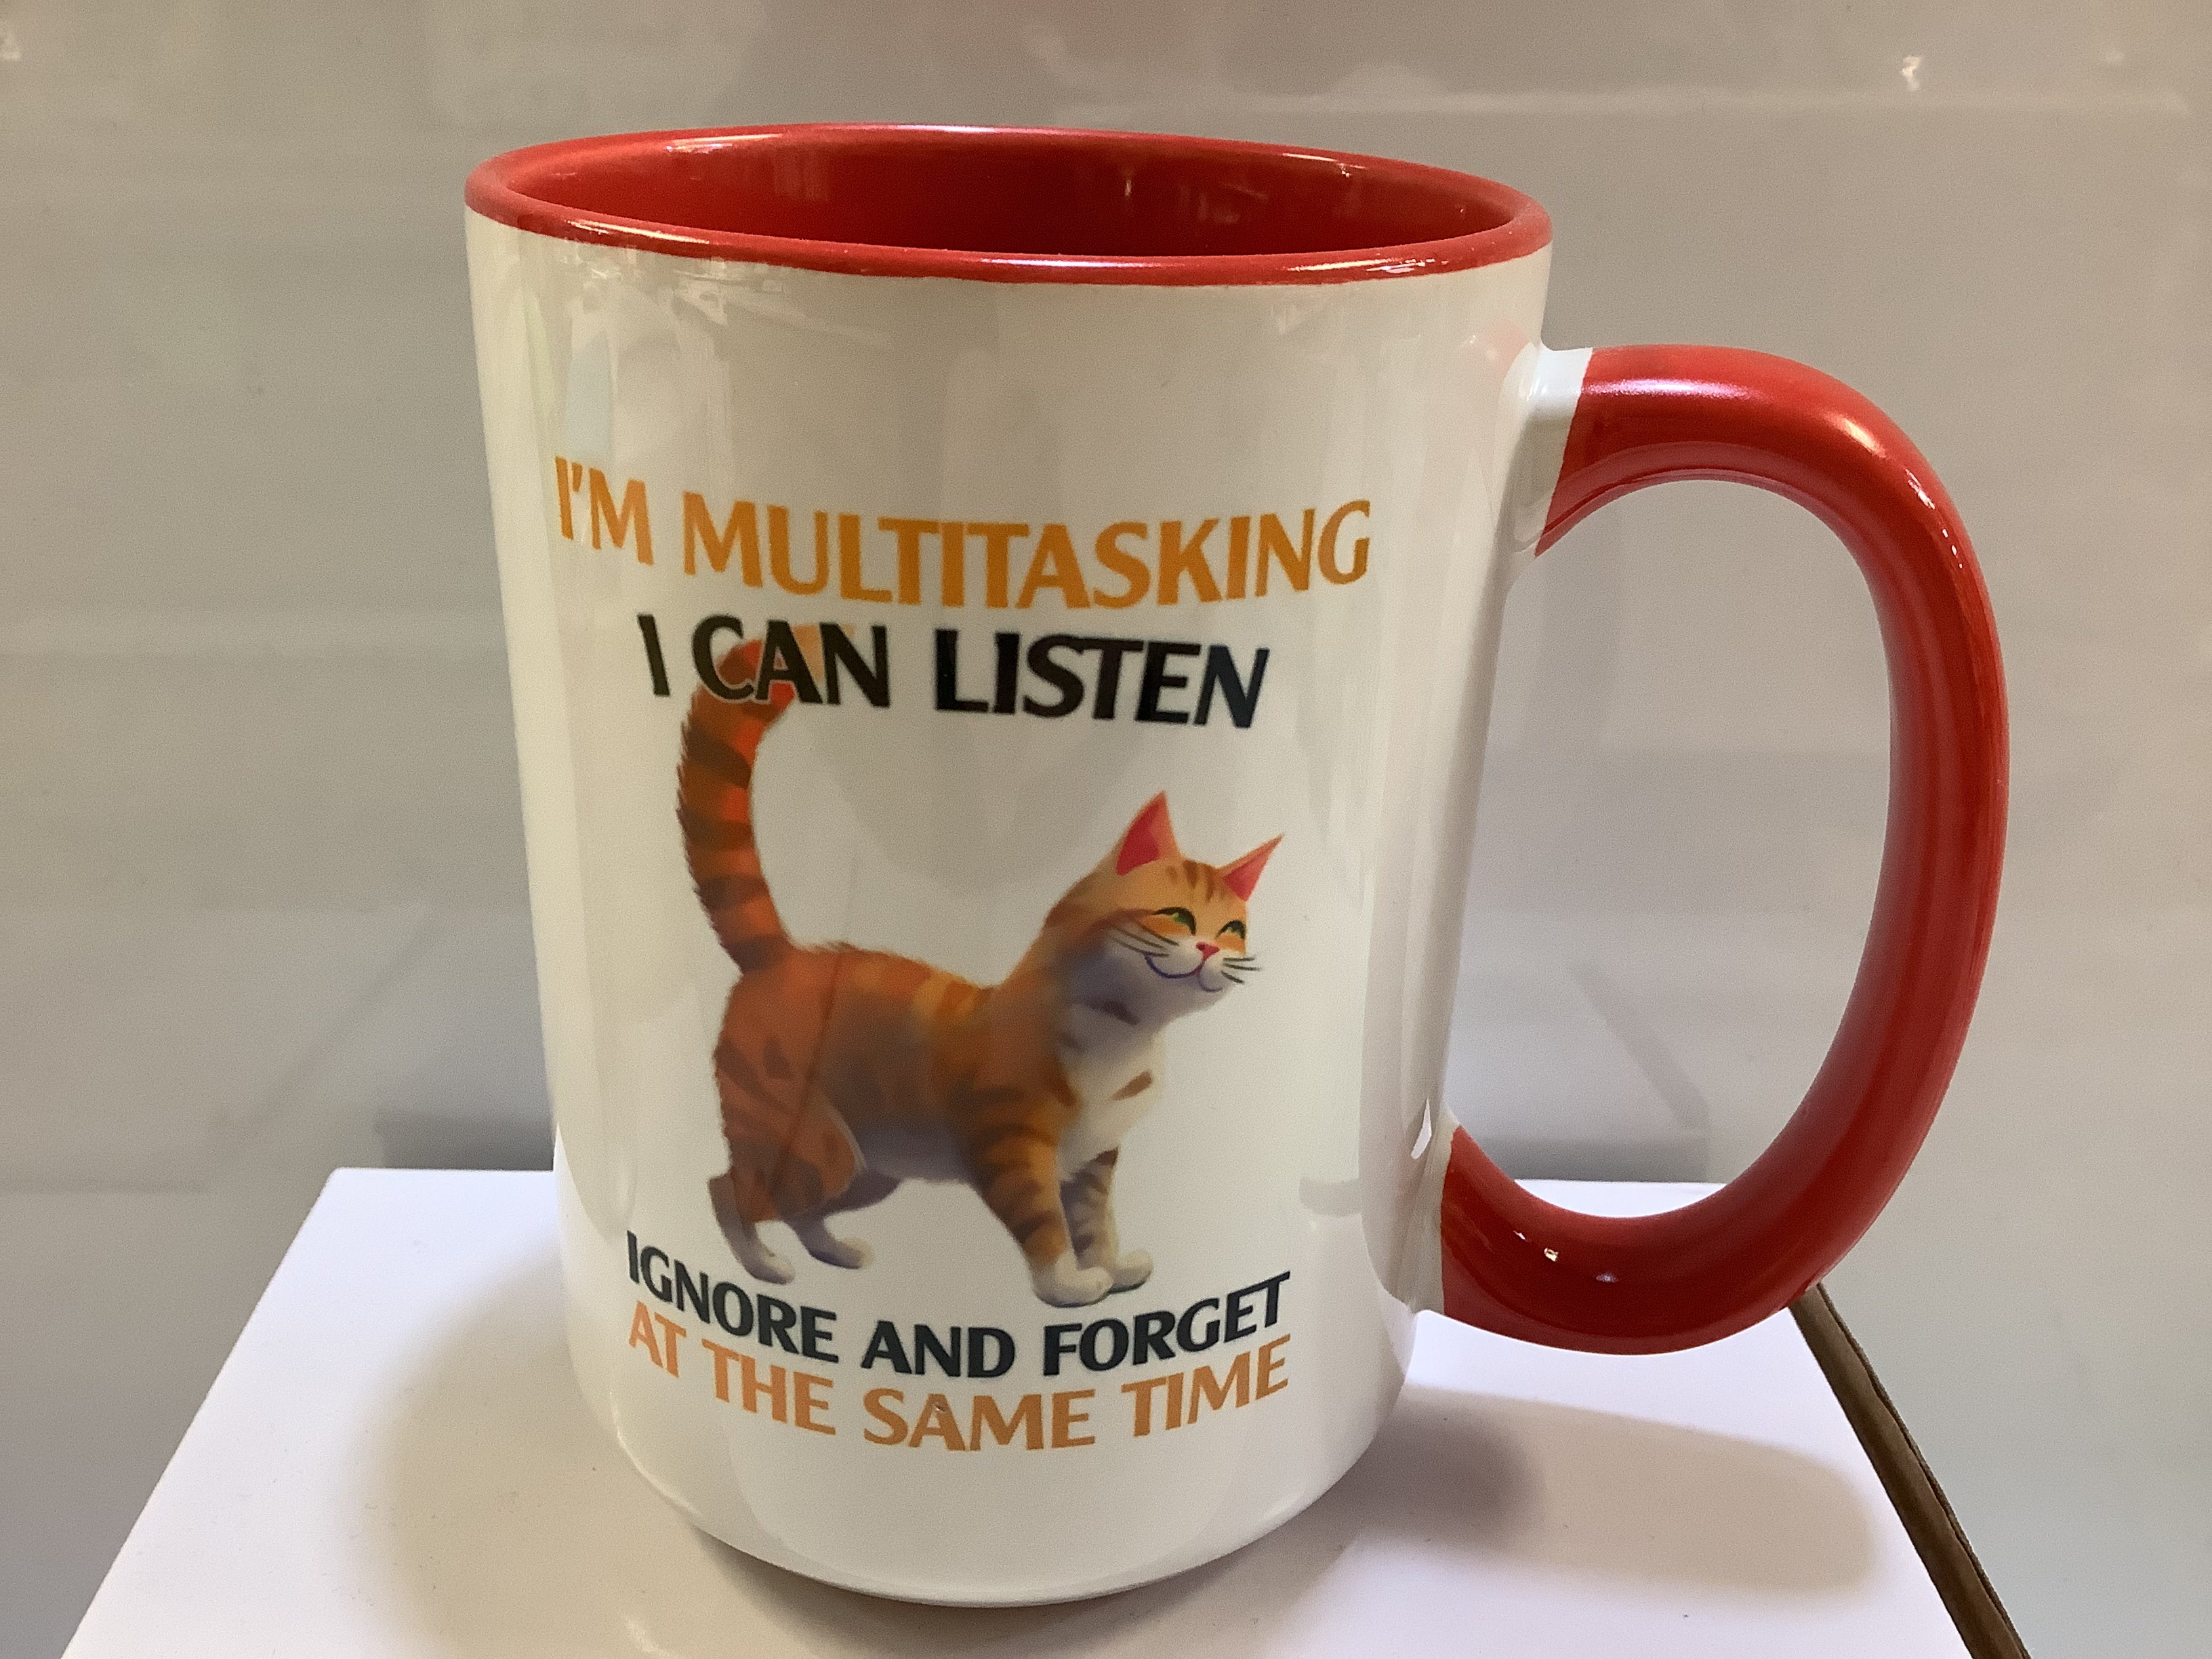 Coffee Mug I'm Multitasking Can Listen, Ignore, and Forget at the Same Time